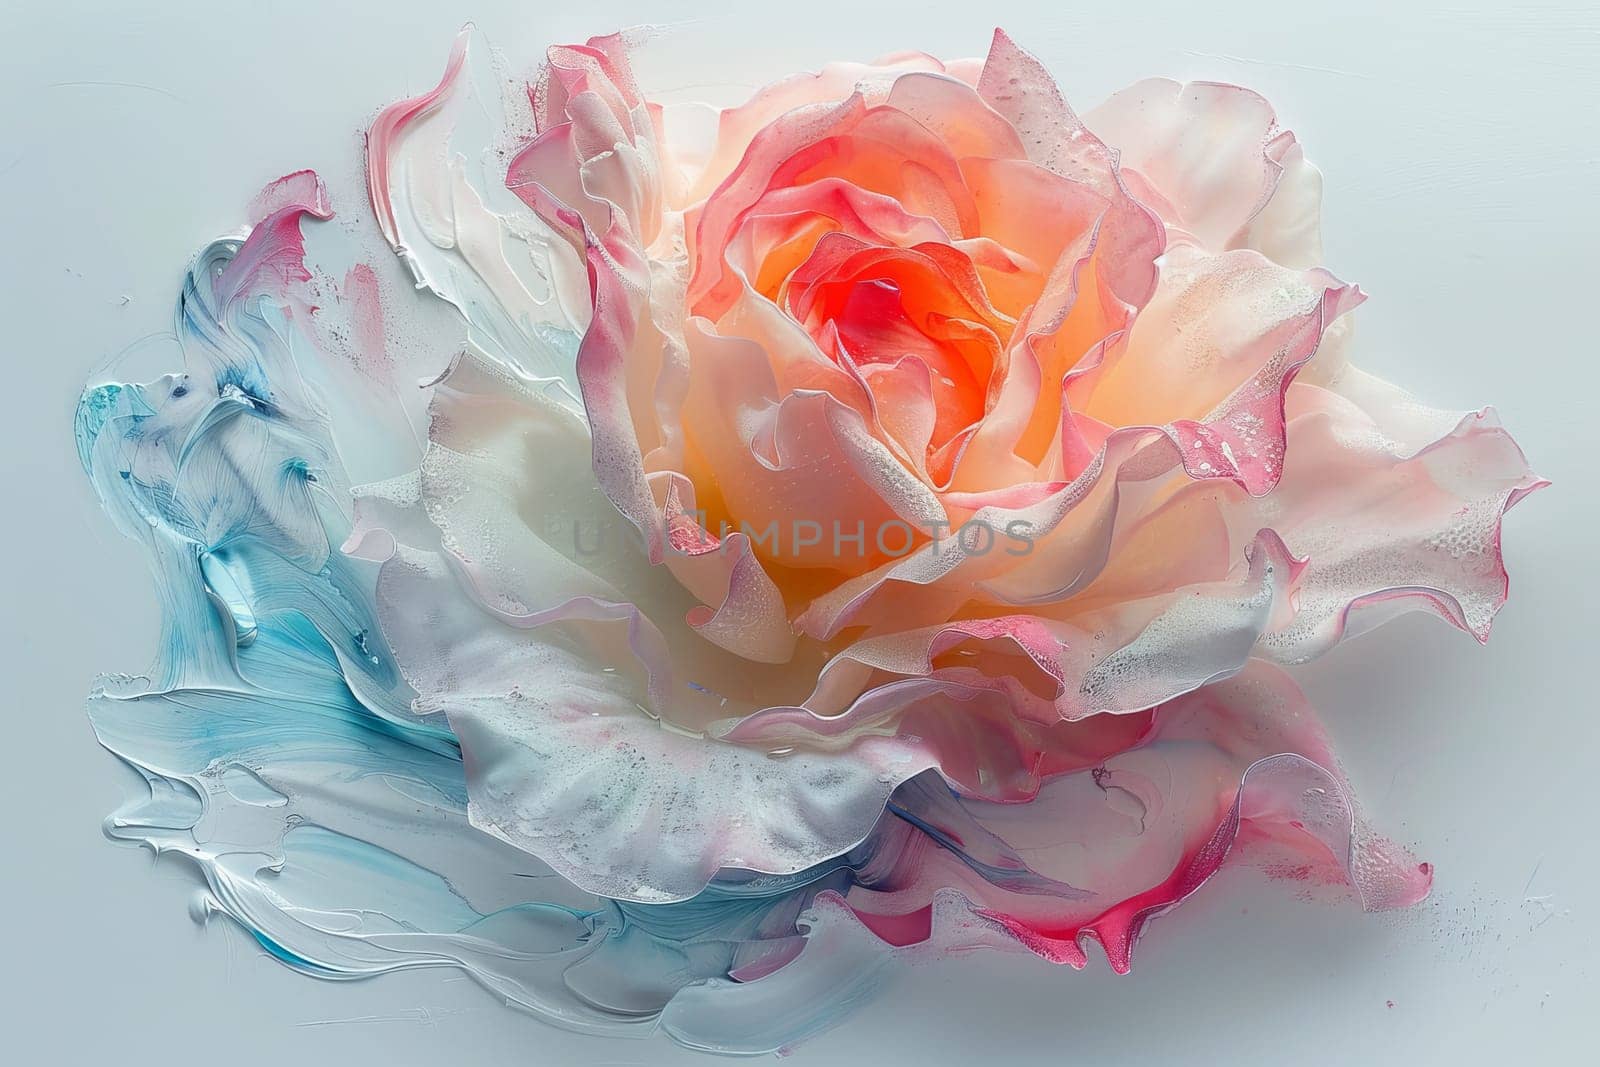 A rose with pink, orange and yellow petals is the main focus of the image by itchaznong